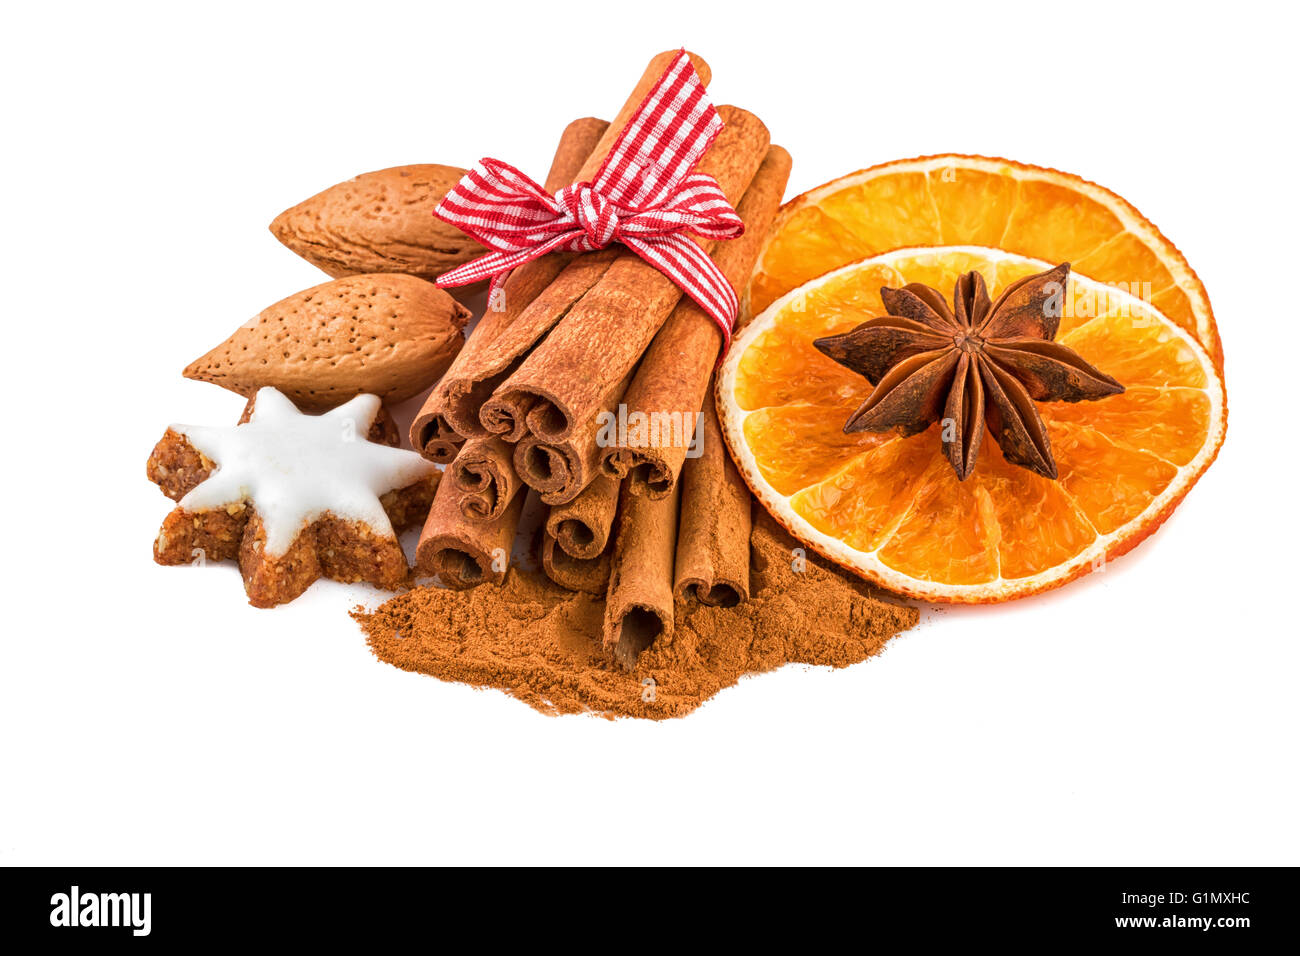 Christmas spice decoration with cinnamon, anise, almond nuts and orange slices. Stock Photo